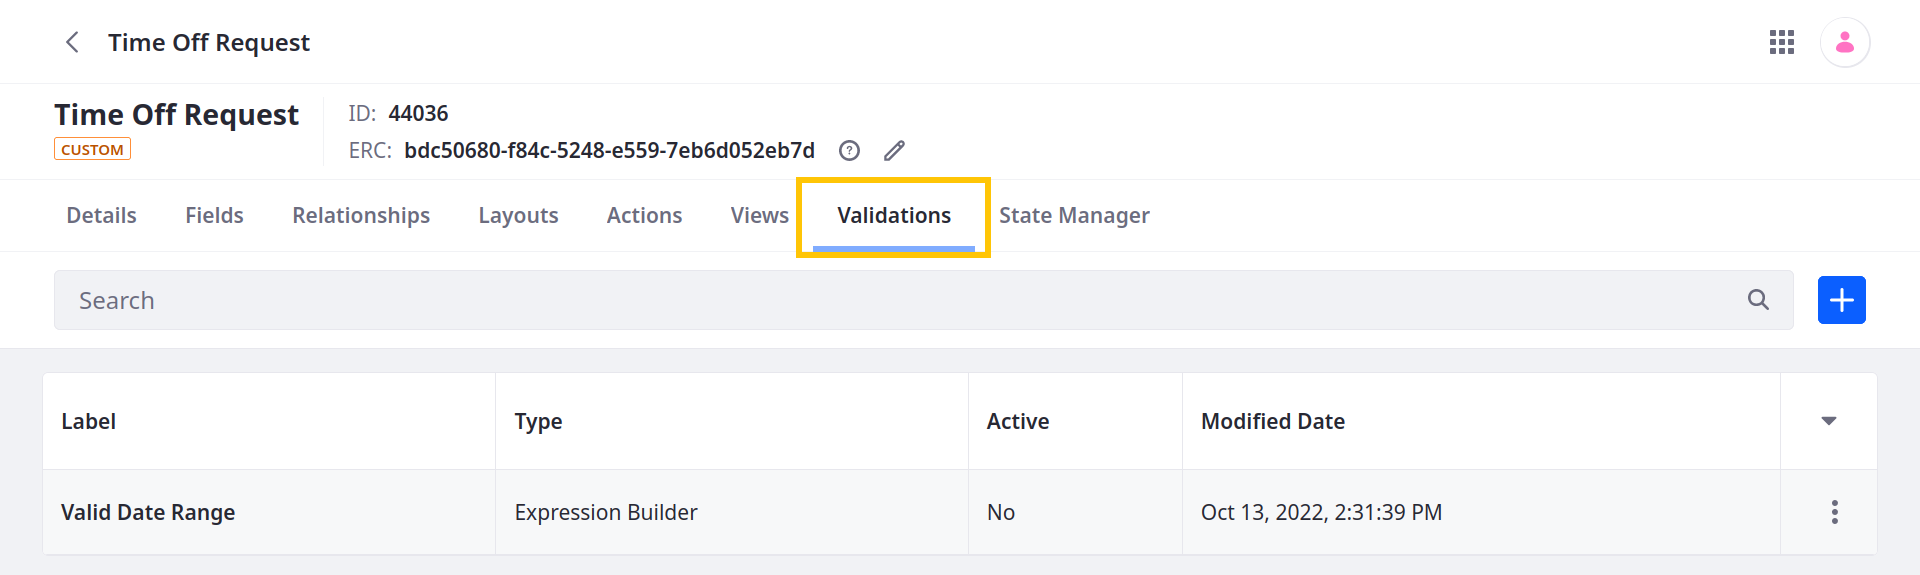 Add custom validations to the object from the Validations tab.